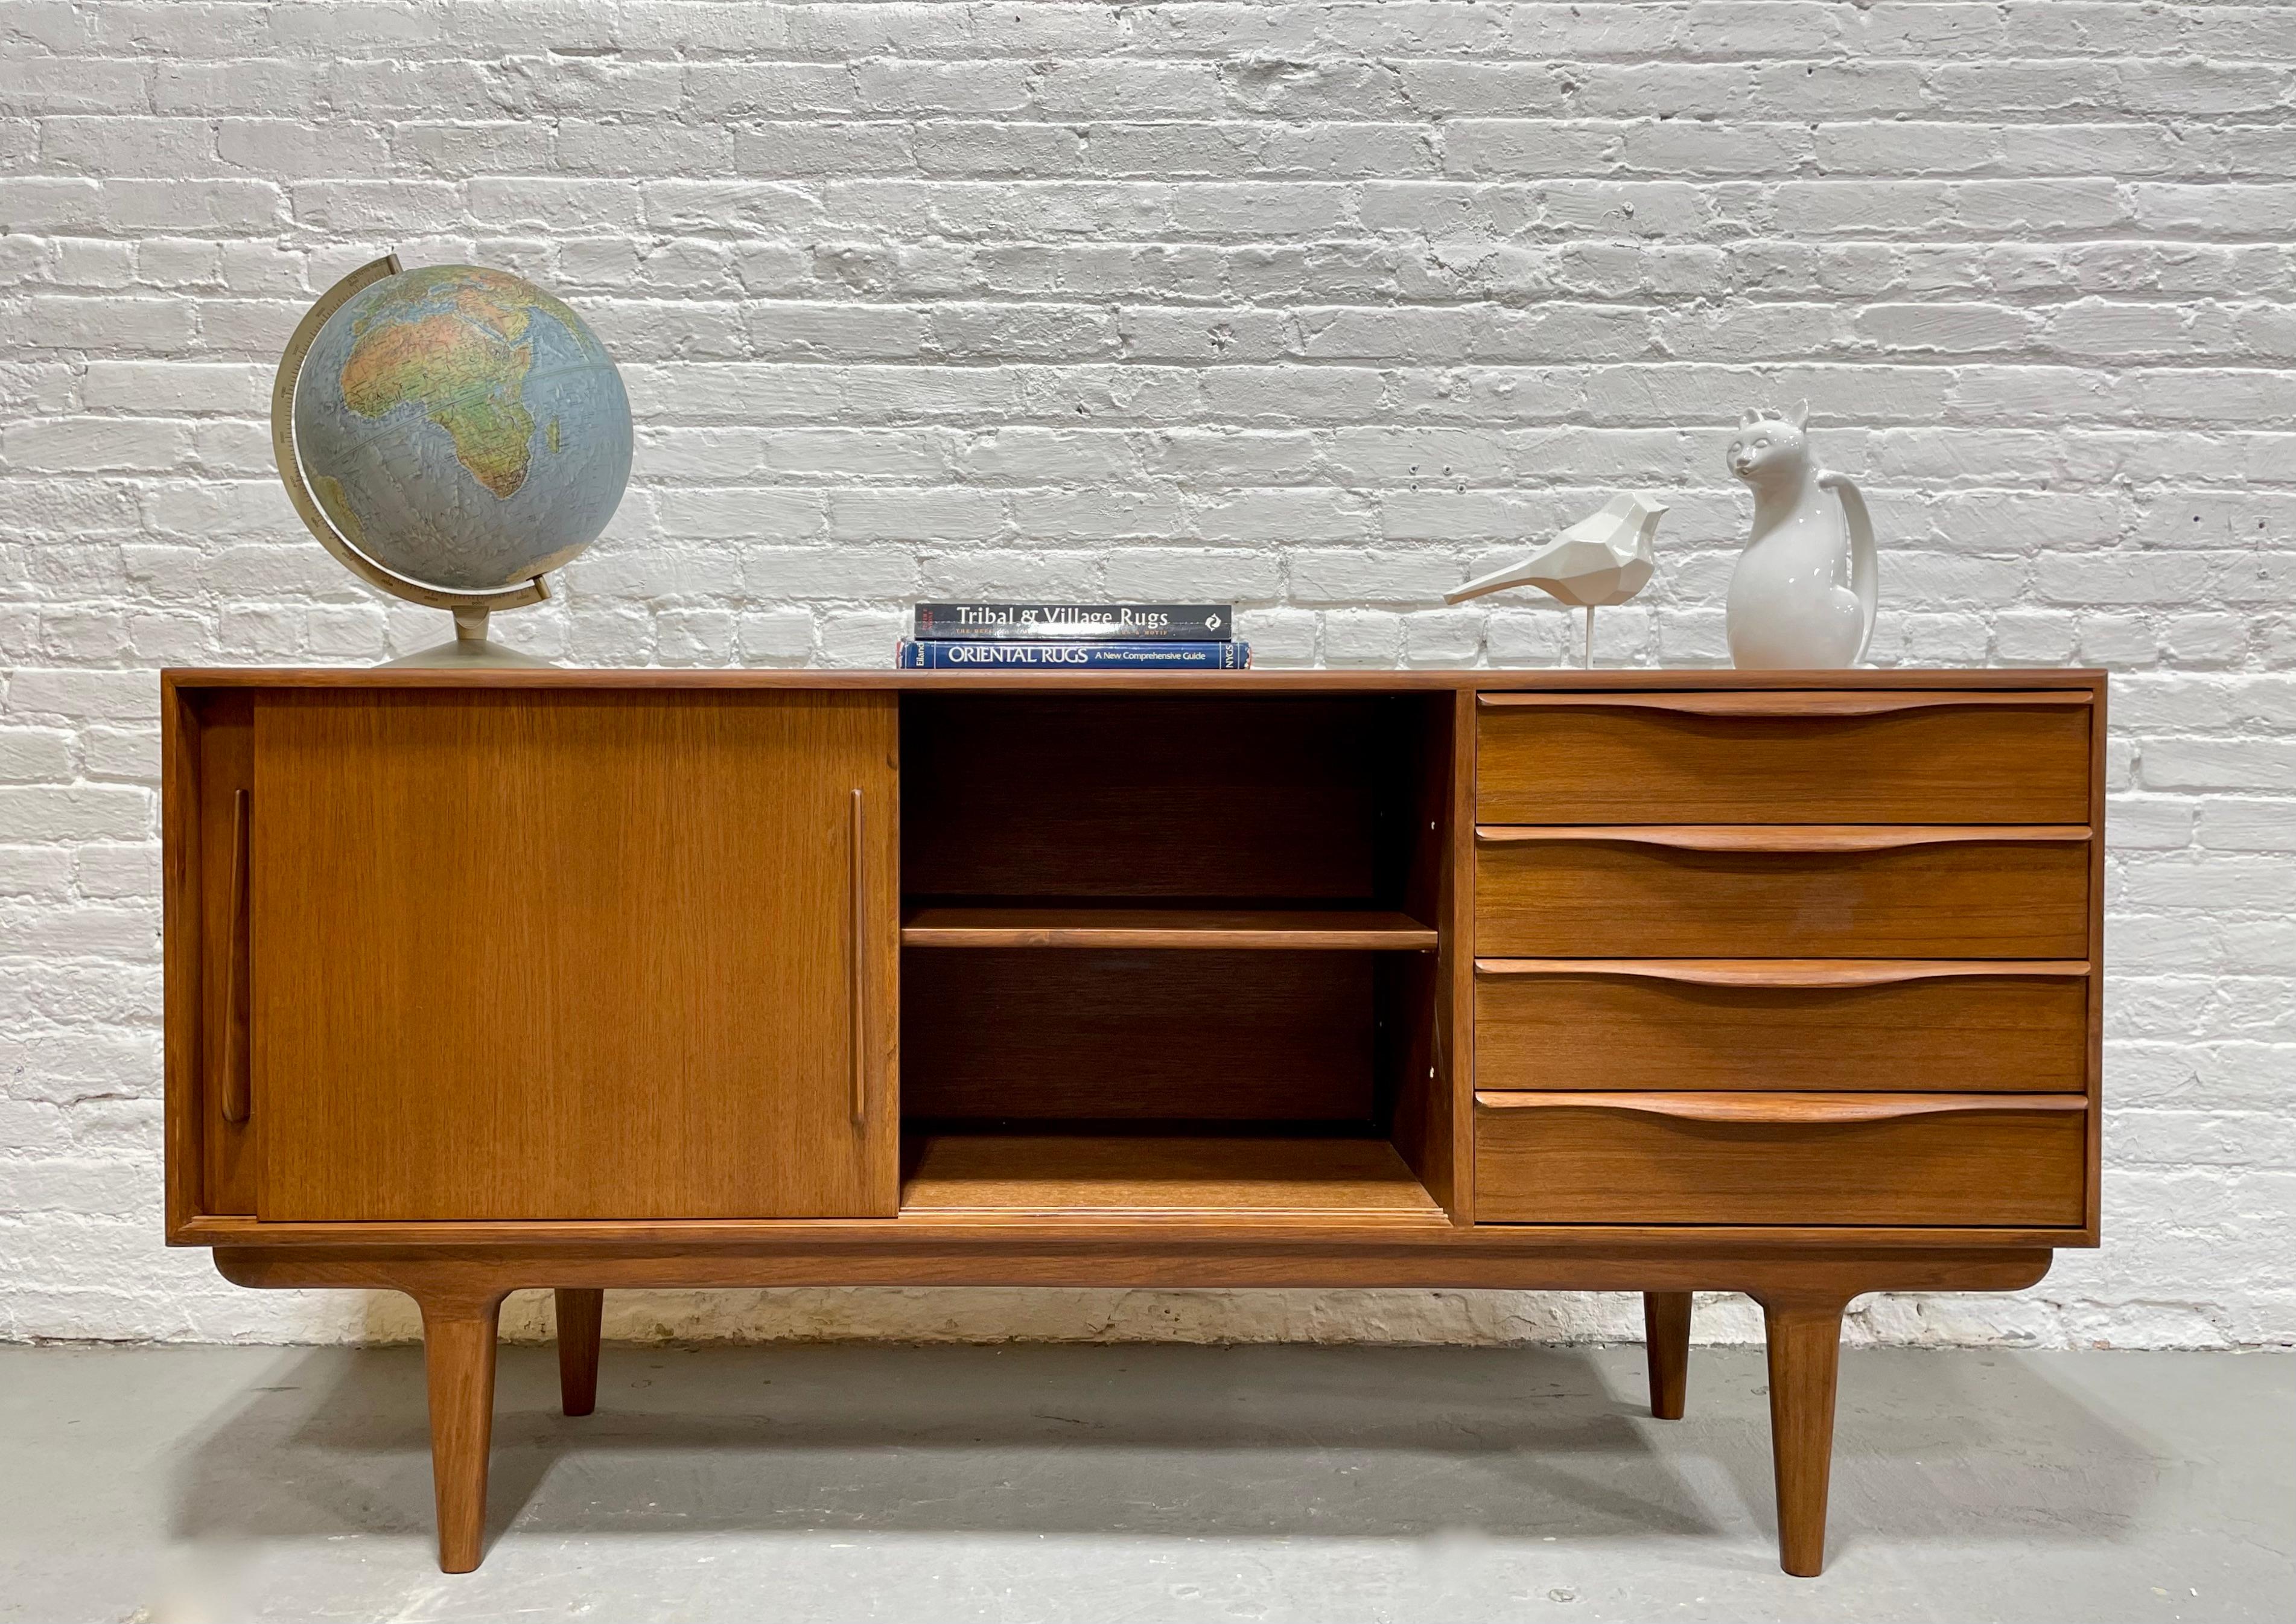 Sculptural Mid-Century Modern Styled Credenza / Media Stand / Sideboard In New Condition For Sale In Weehawken, NJ